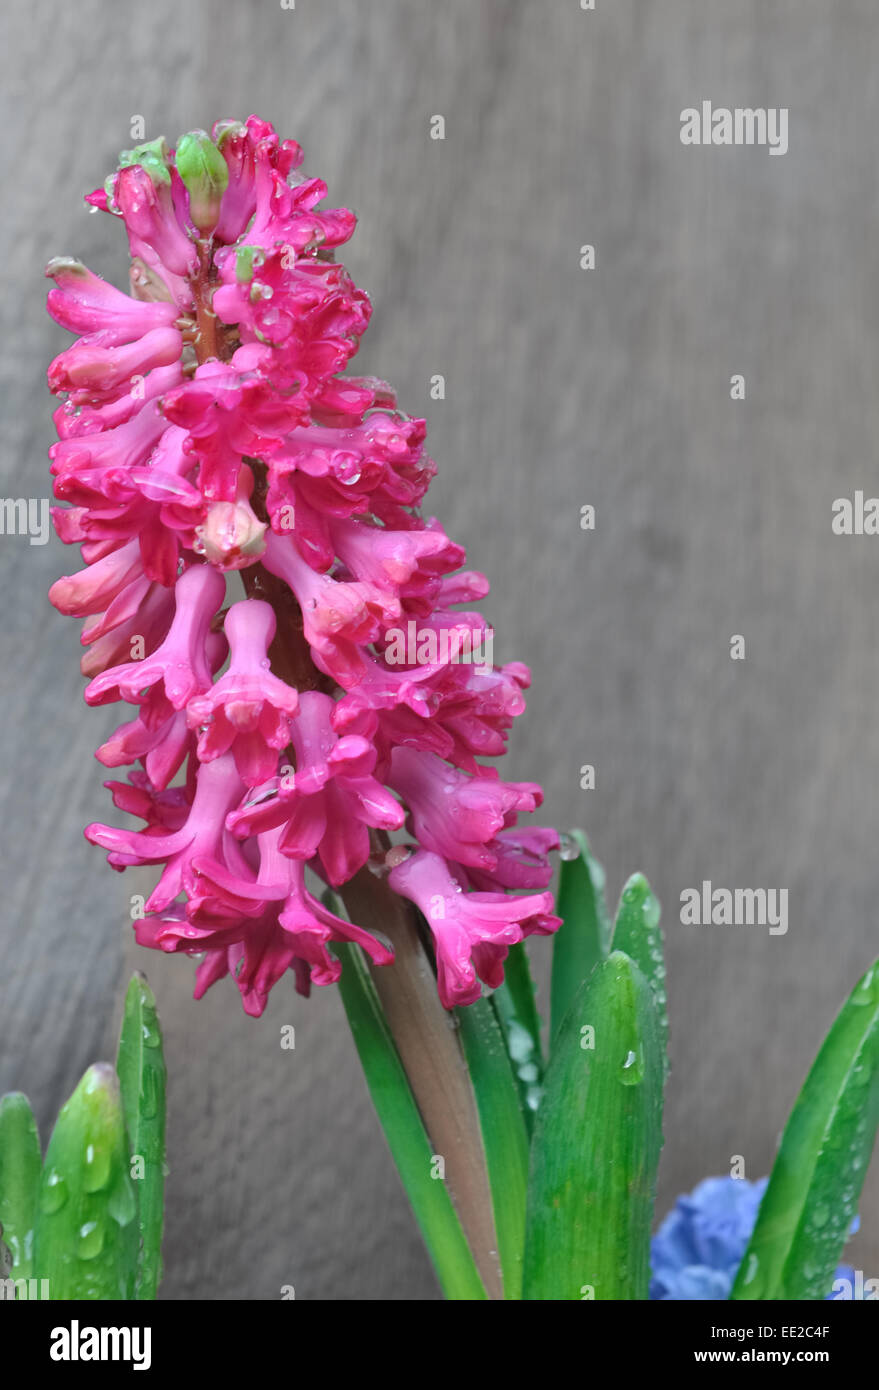 leaves and hyacinth flower covered with drops of water Stock Photo